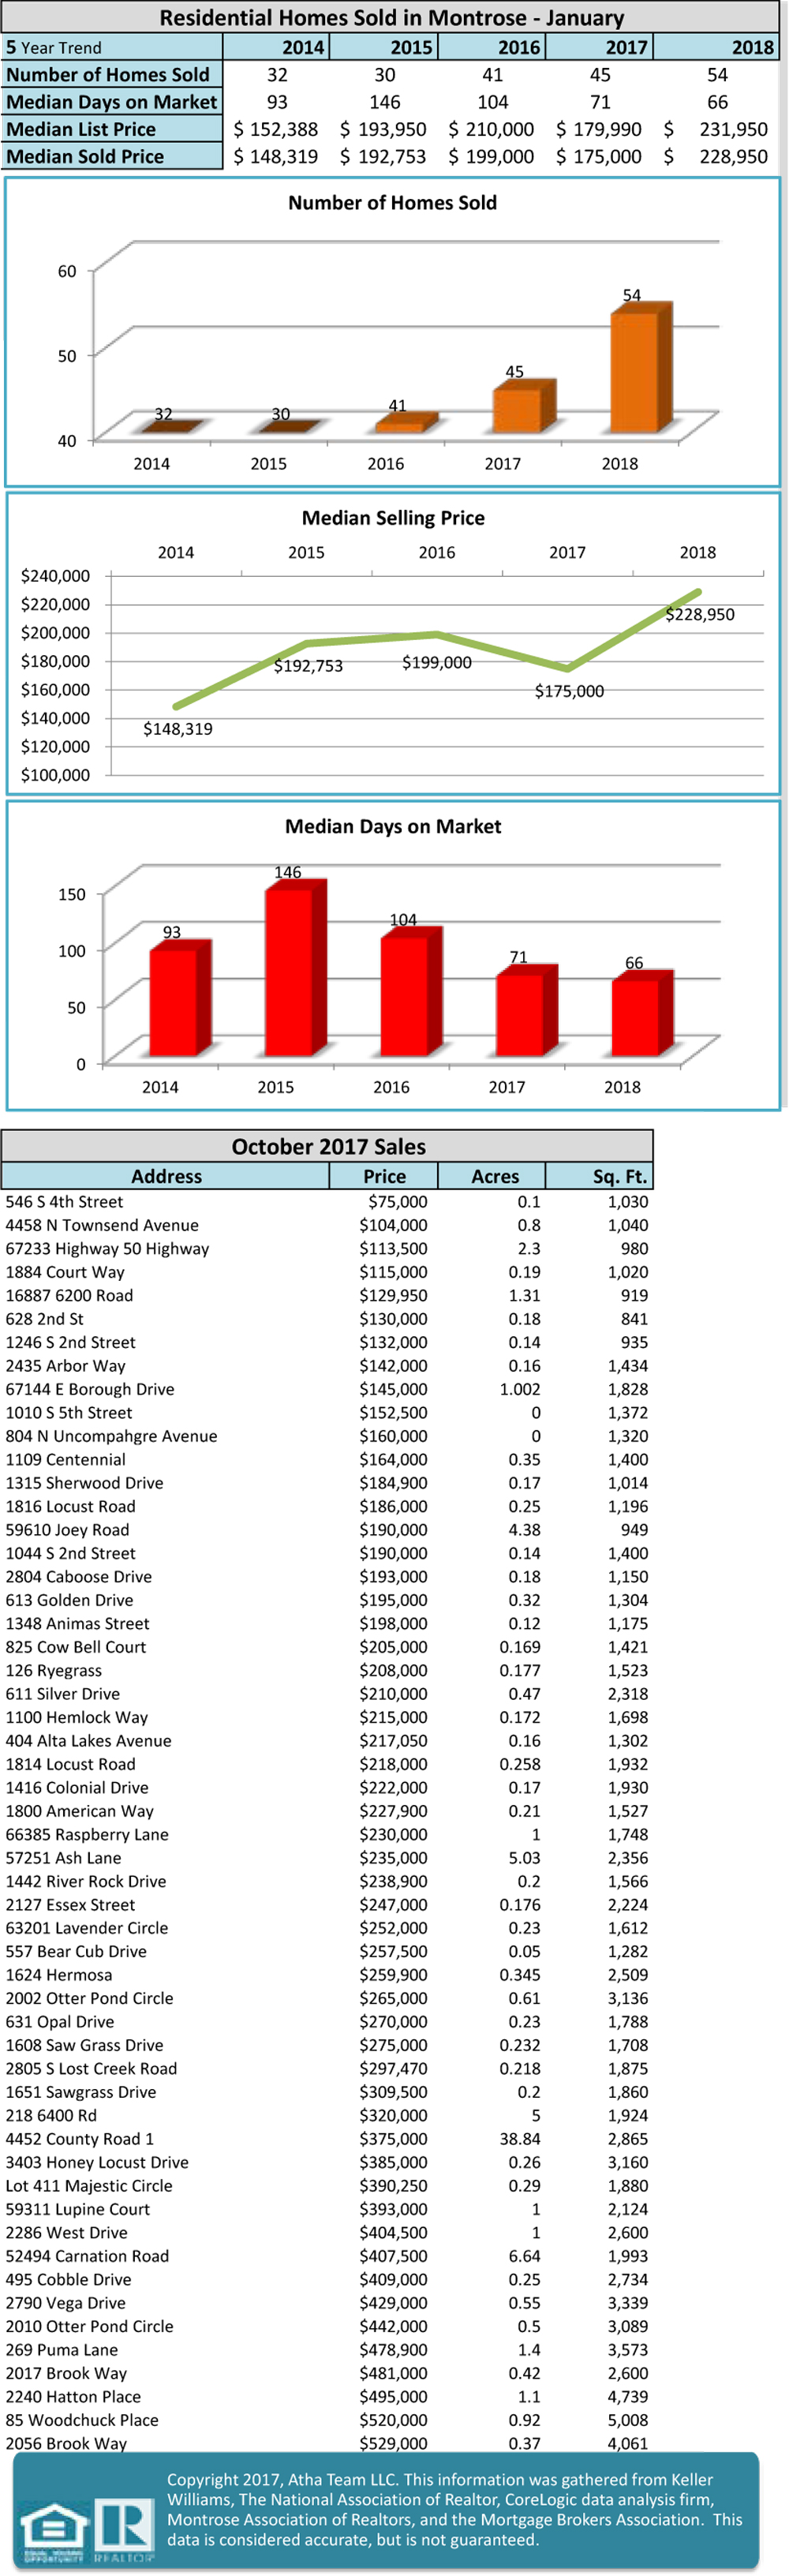 February 2018 local and national market stats update - Atha Team